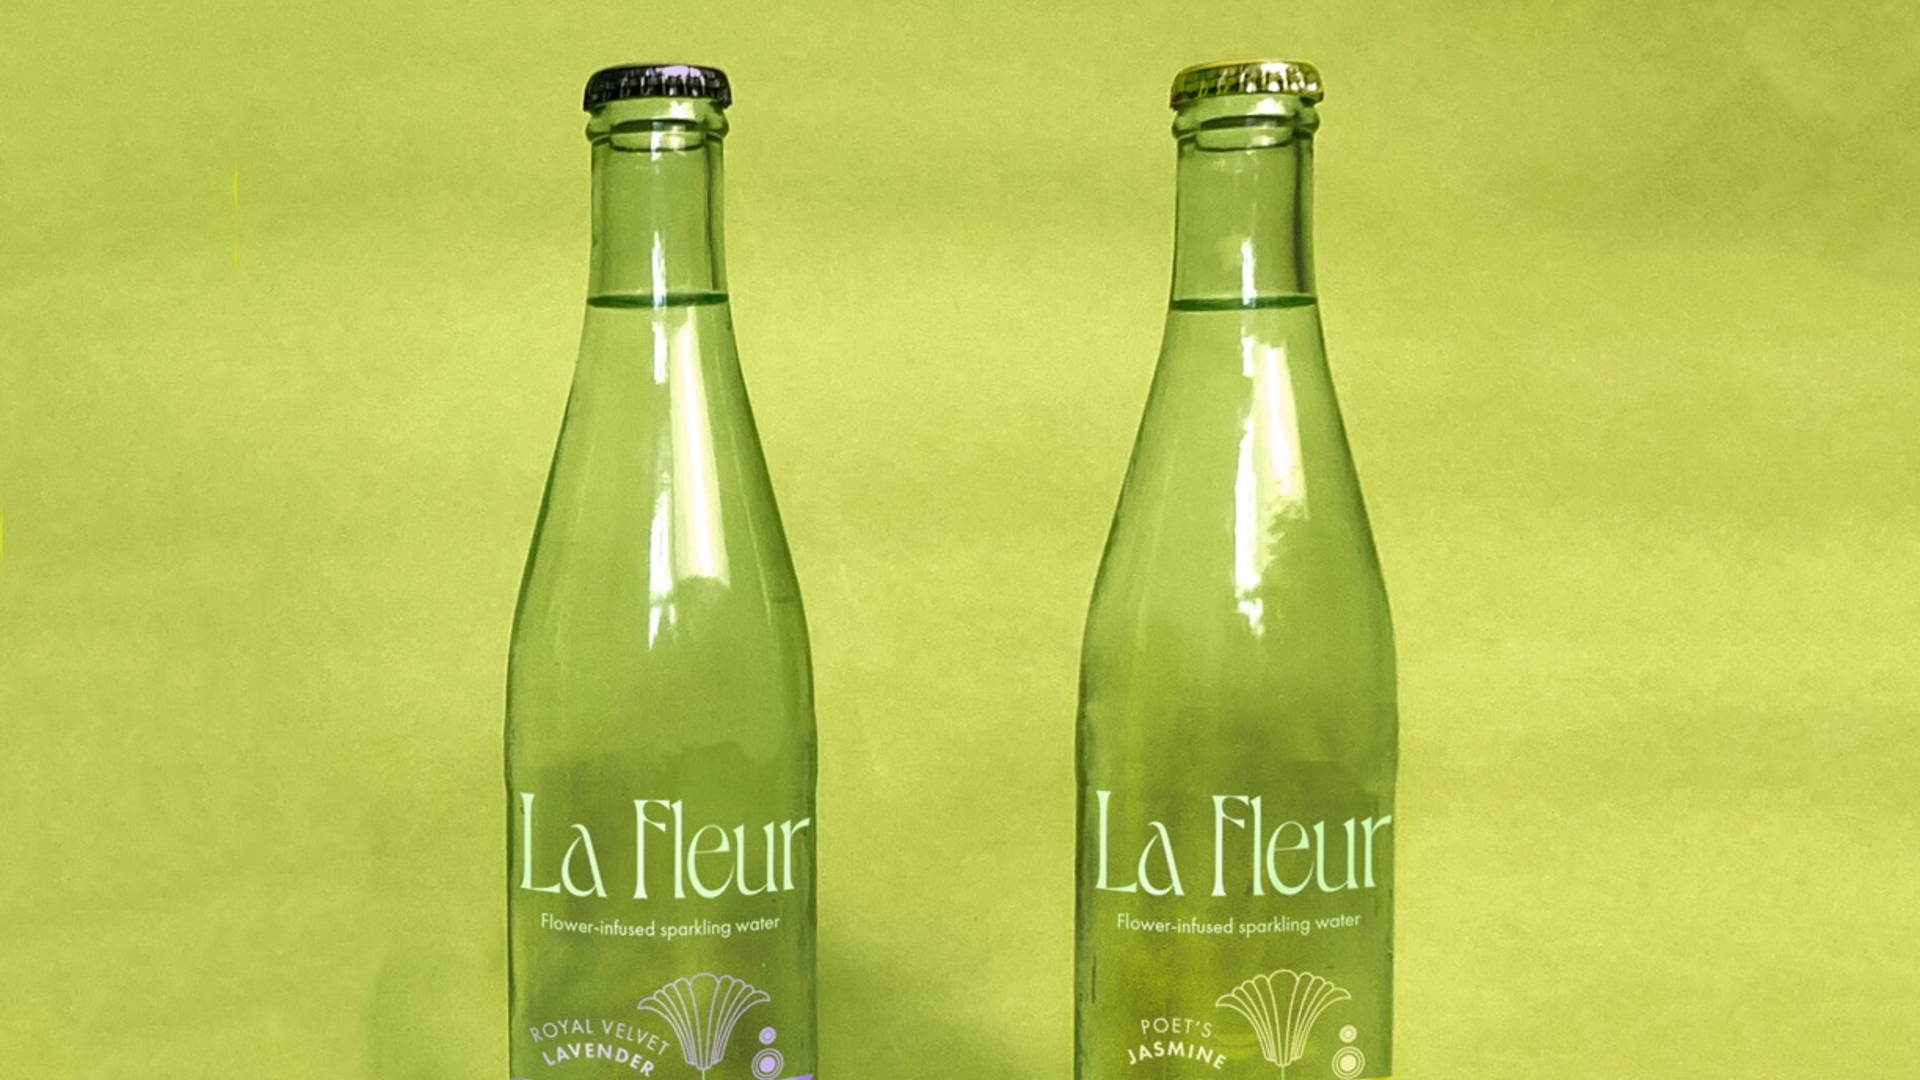 Featured image for Student Week: La Fleur Is a Flower-Infused Sparkling Water